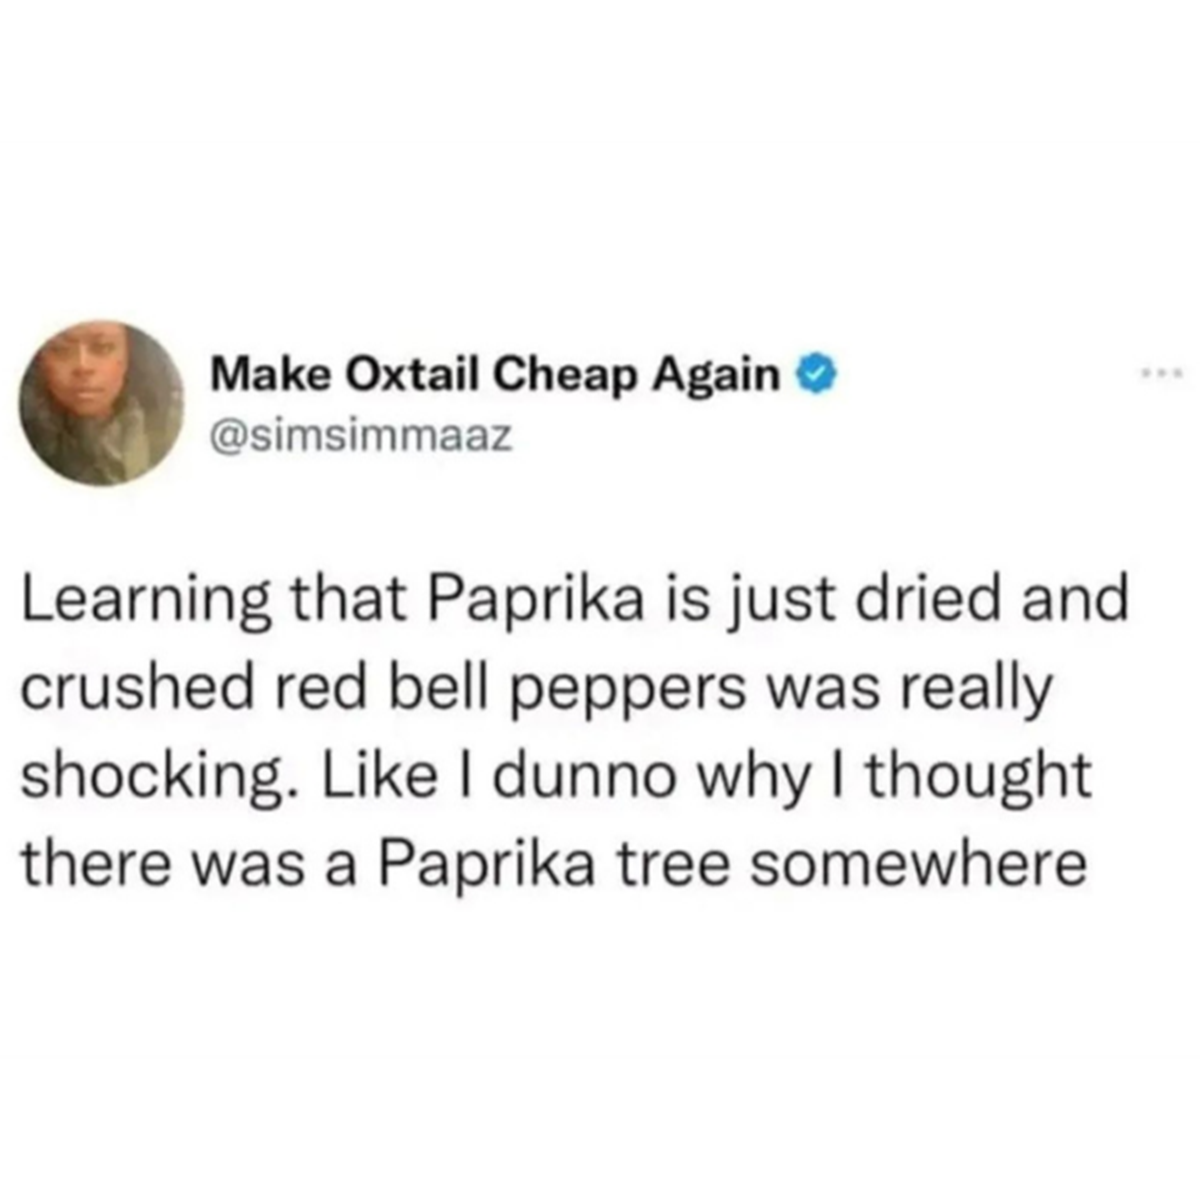 screenshot - Make Oxtail Cheap Again Learning that Paprika is just dried and crushed red bell peppers was really shocking. I dunno why I thought there was a Paprika tree somewhere